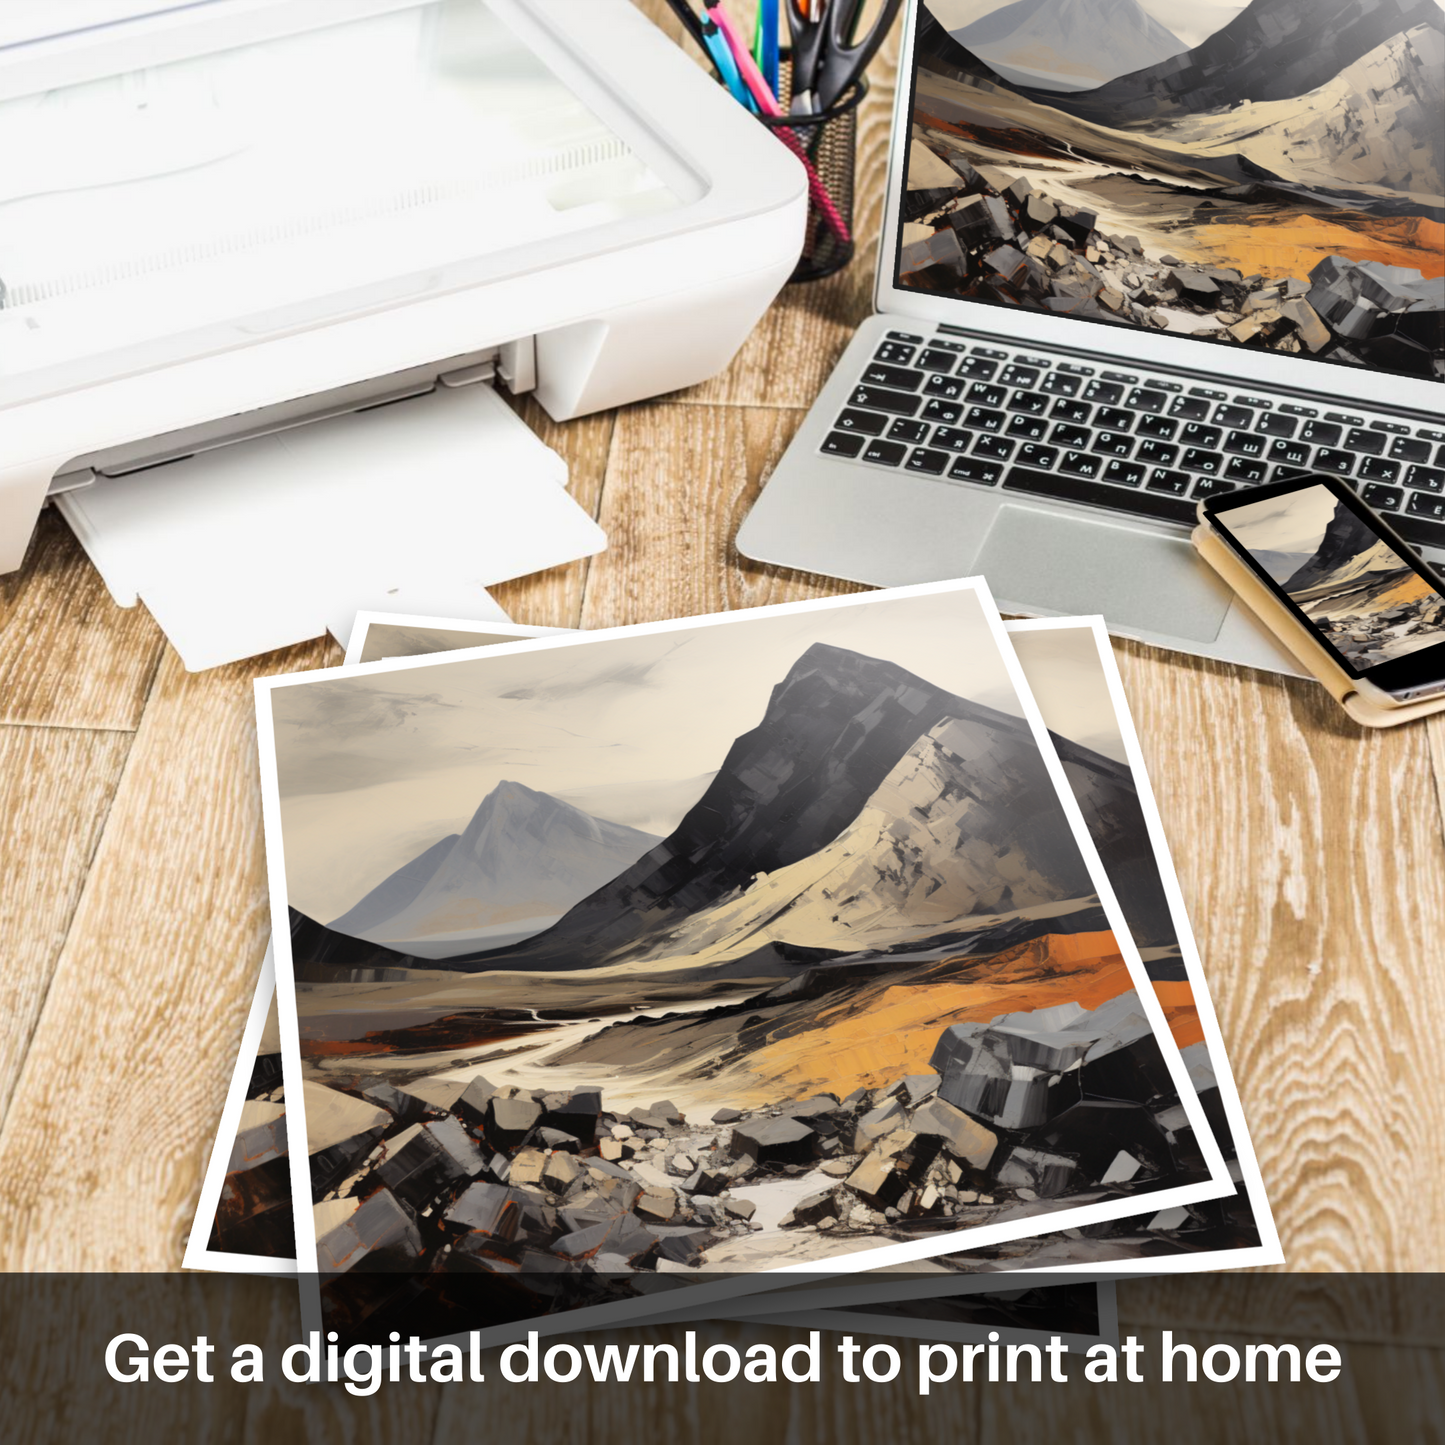 Downloadable and printable picture of Sgurr Dearg, Highlands